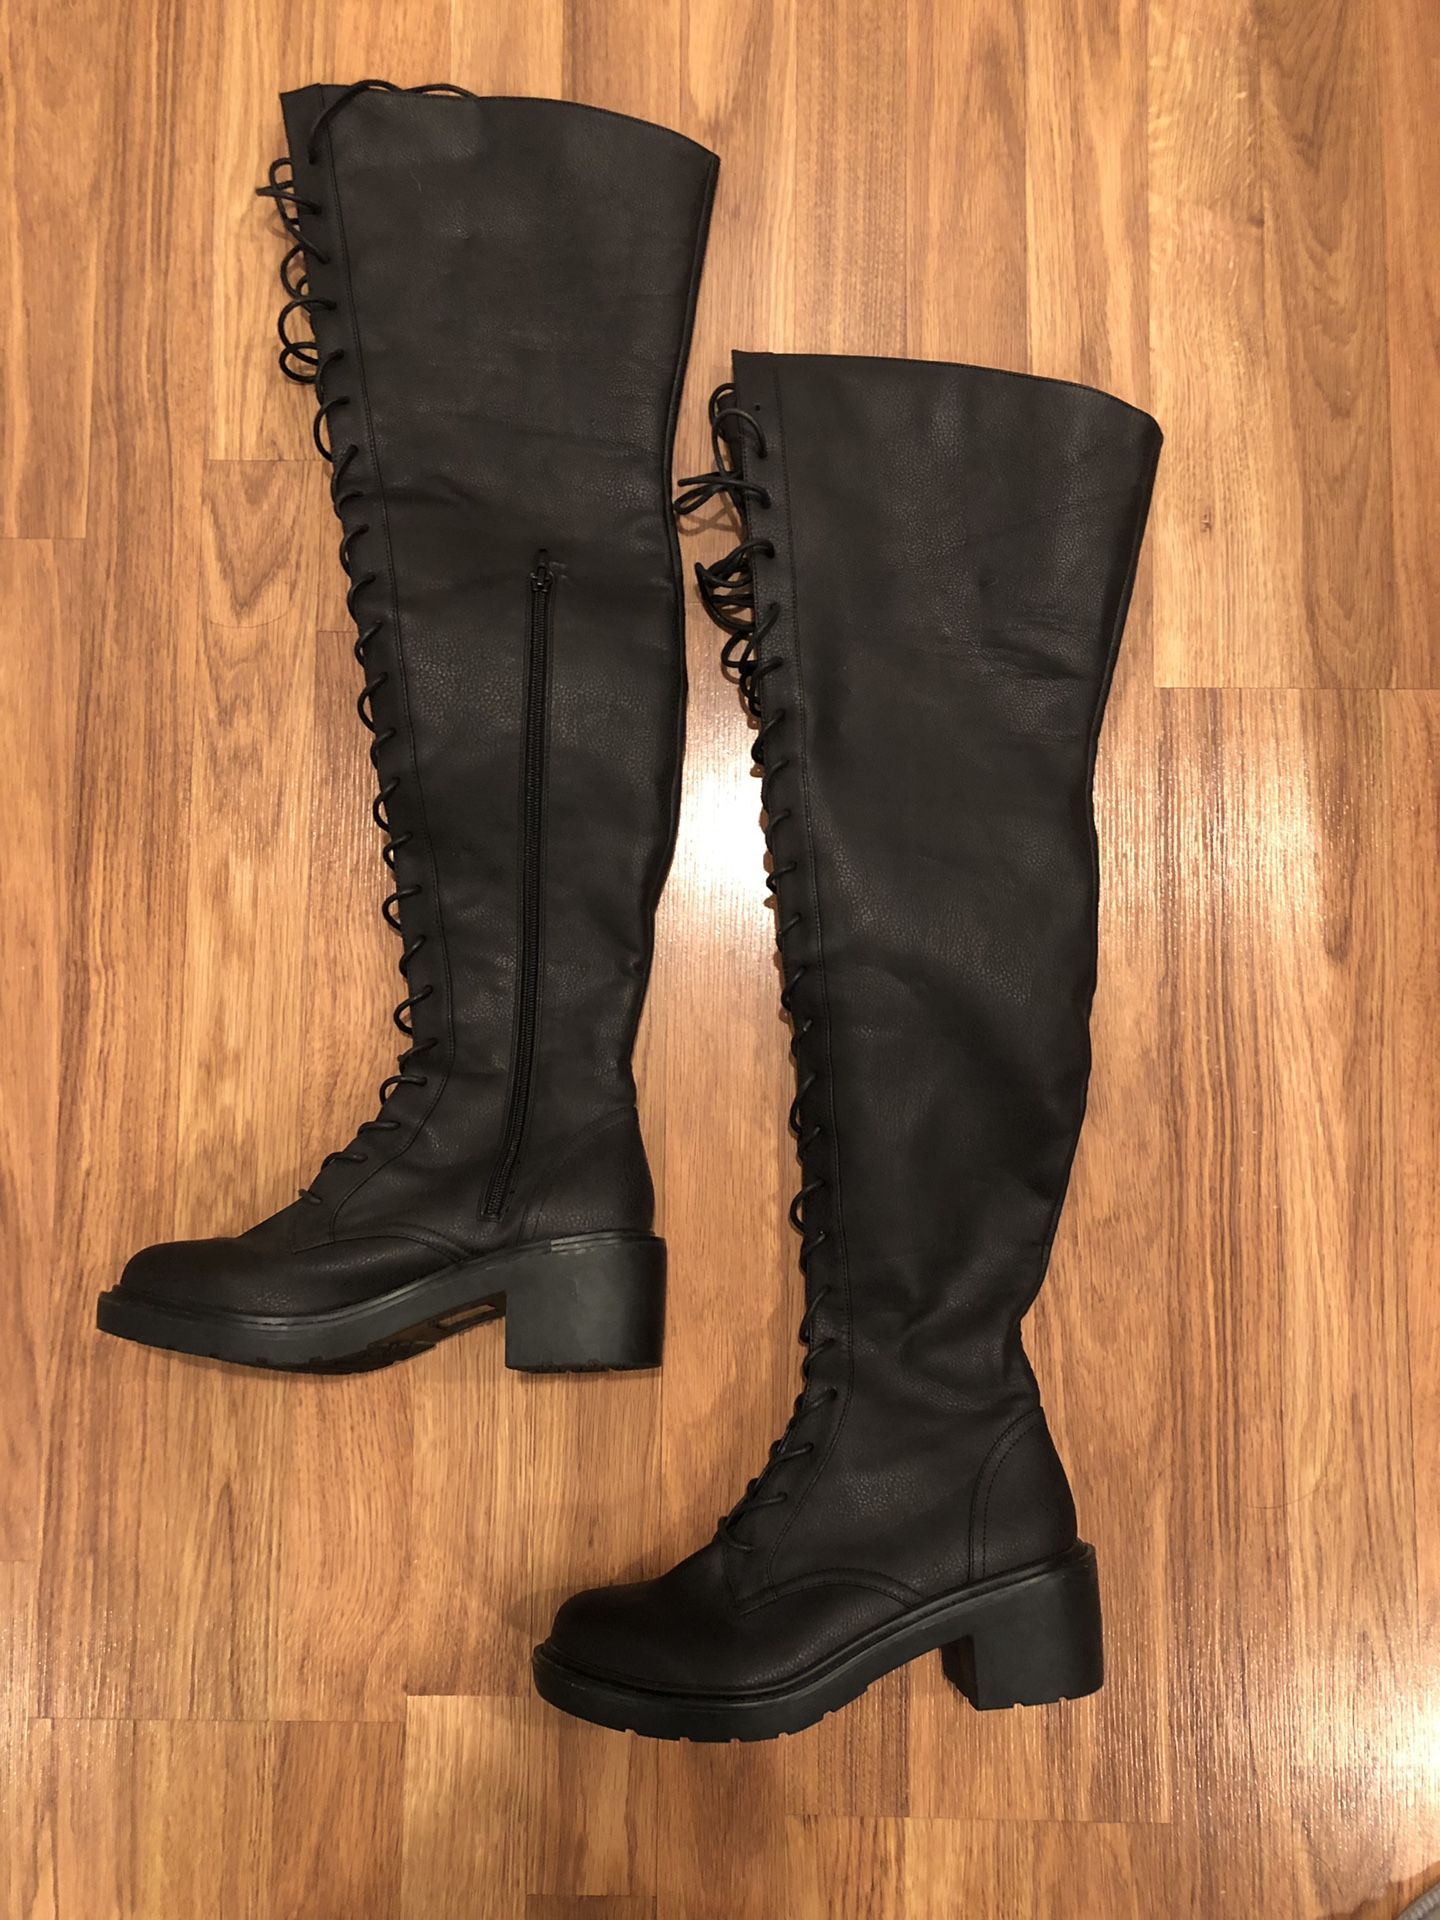 Boots Over the Knee Size 9 Womens